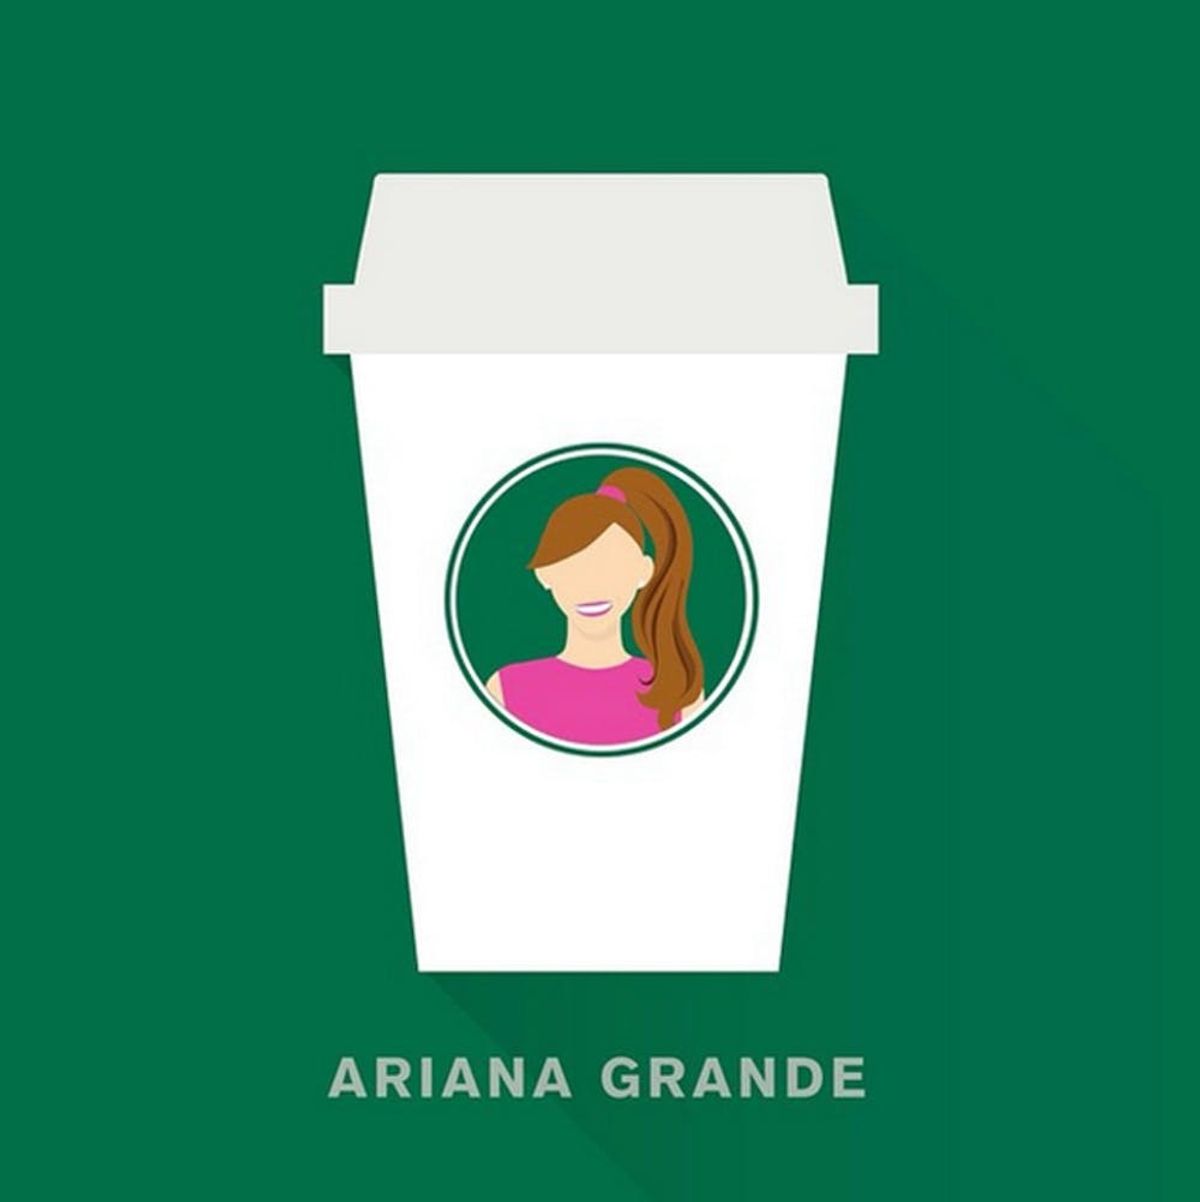 See Ariana Grande like You Never Have Before With These Punny Illustrations